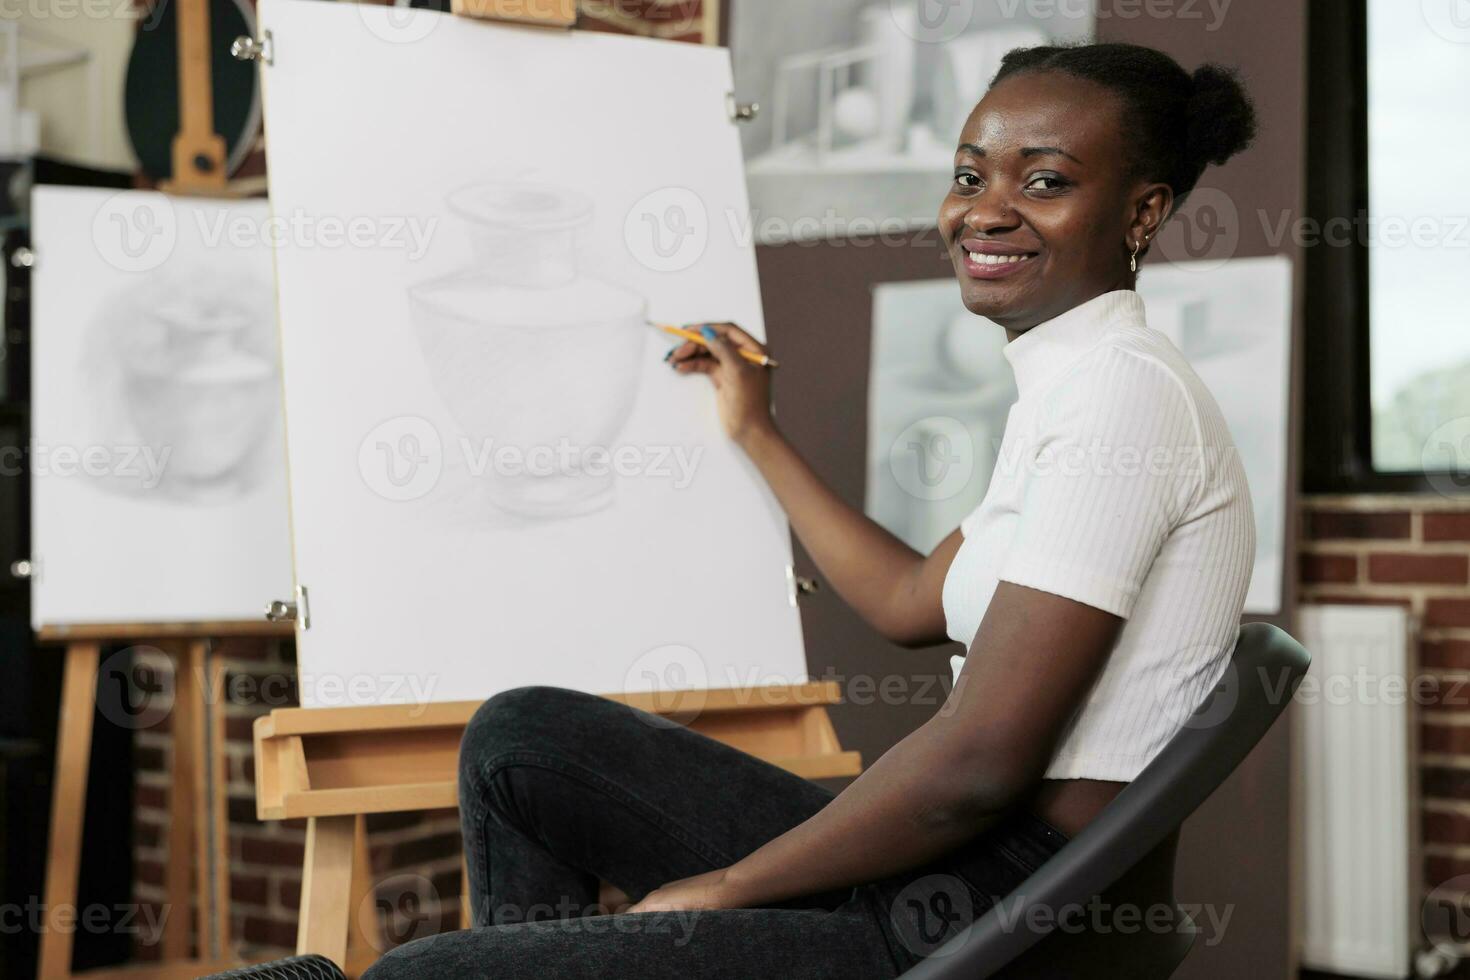 Happy woman sitting on chair at easel and smiling at camera, holding pencil creating masterpiece during group drawing class. Creative leisure activities and mental health concept photo